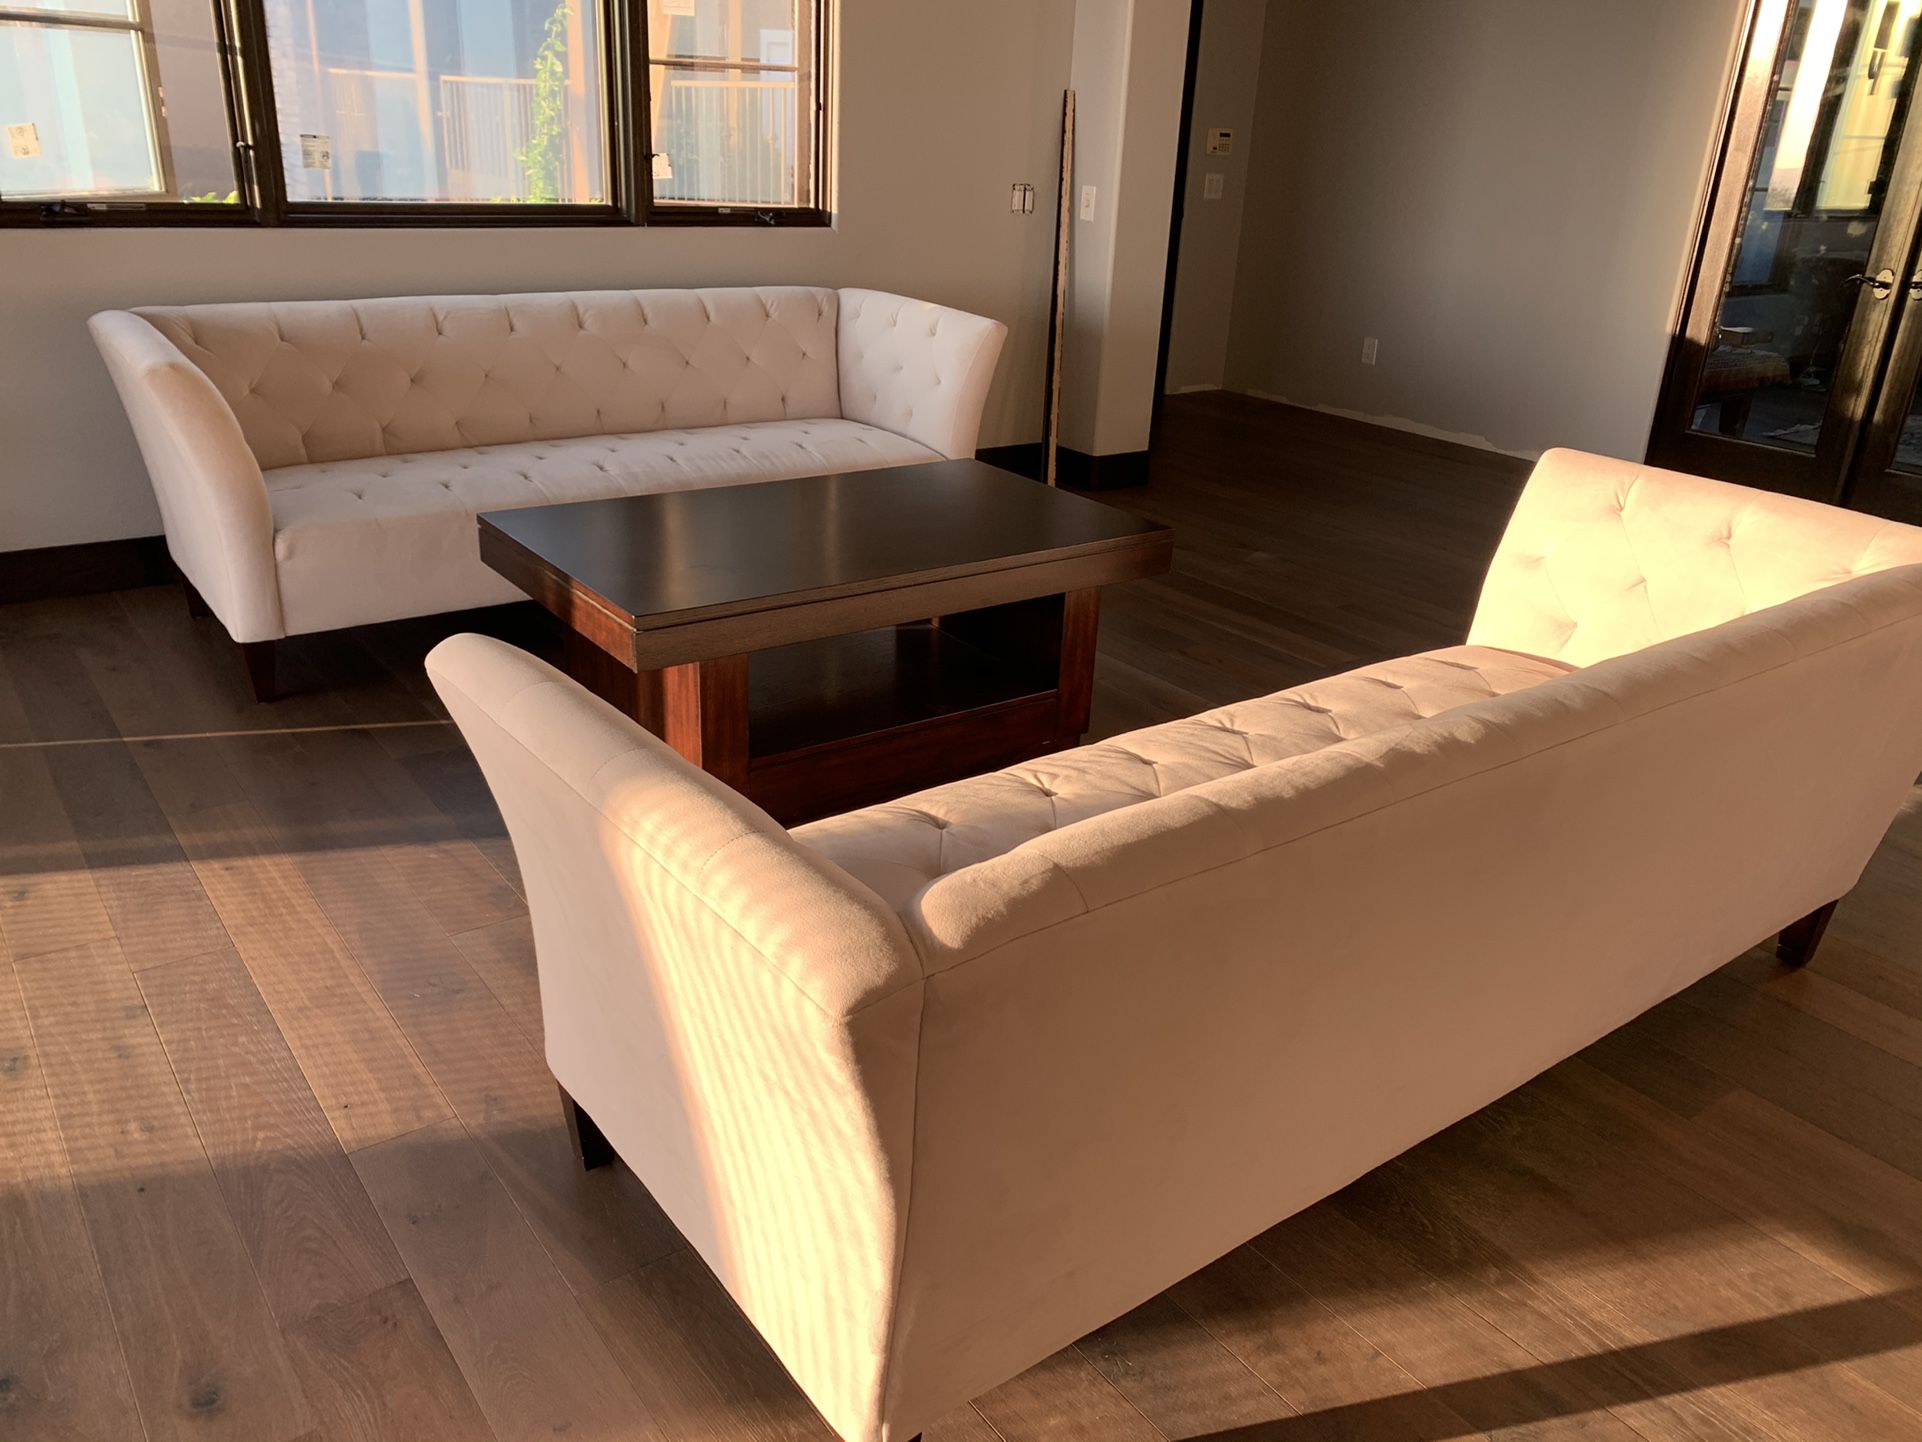 2 Sofas & Coffee Table For Sale